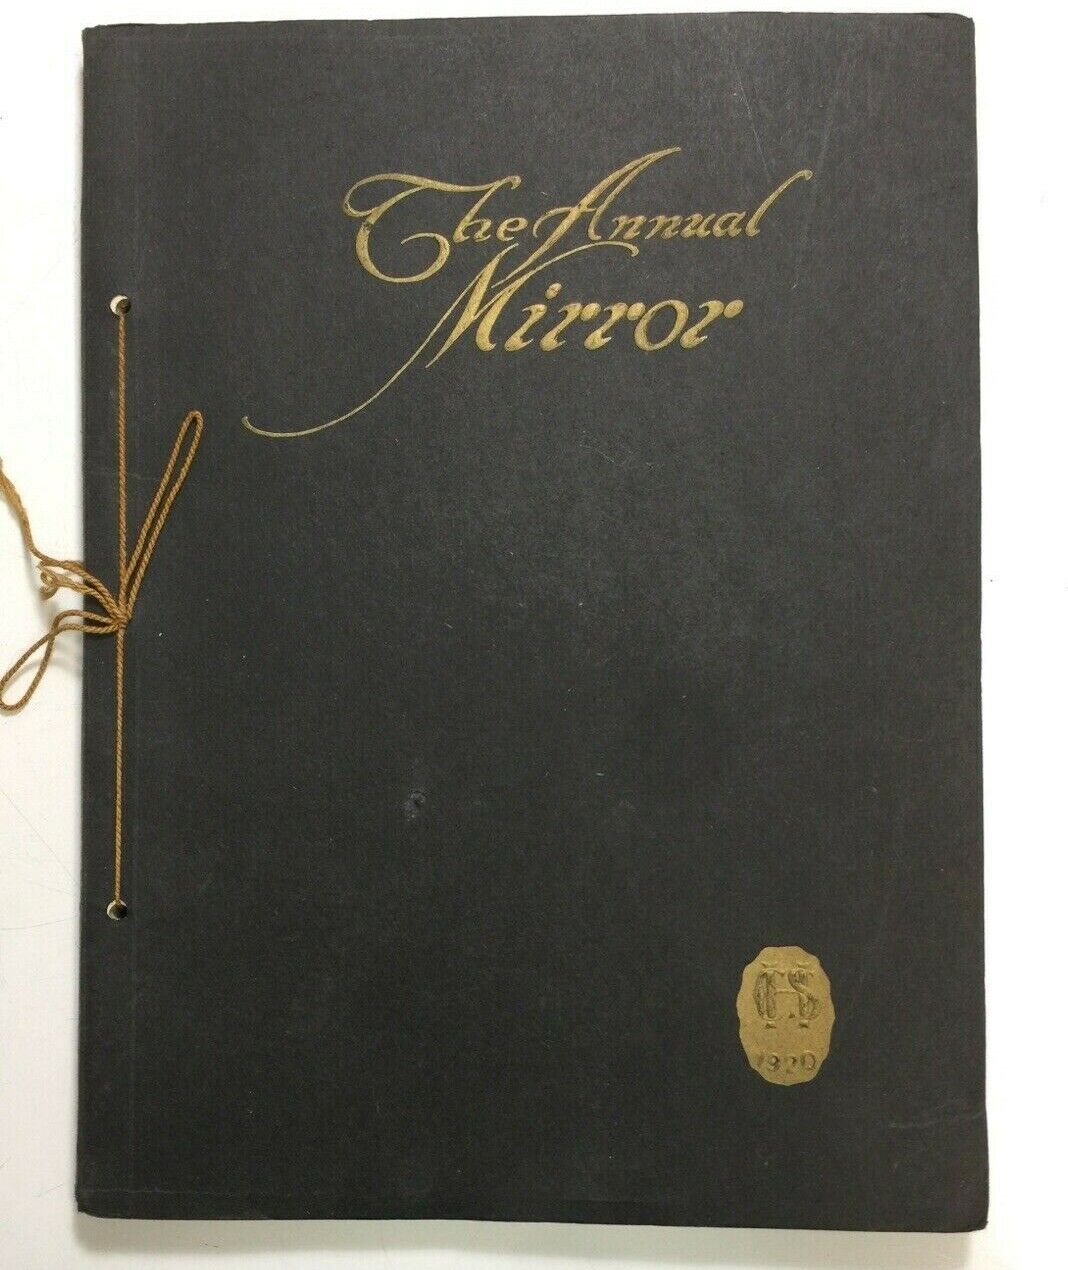 1920 The Annual Mirror Lima Central high School Yearbook Super nice shape